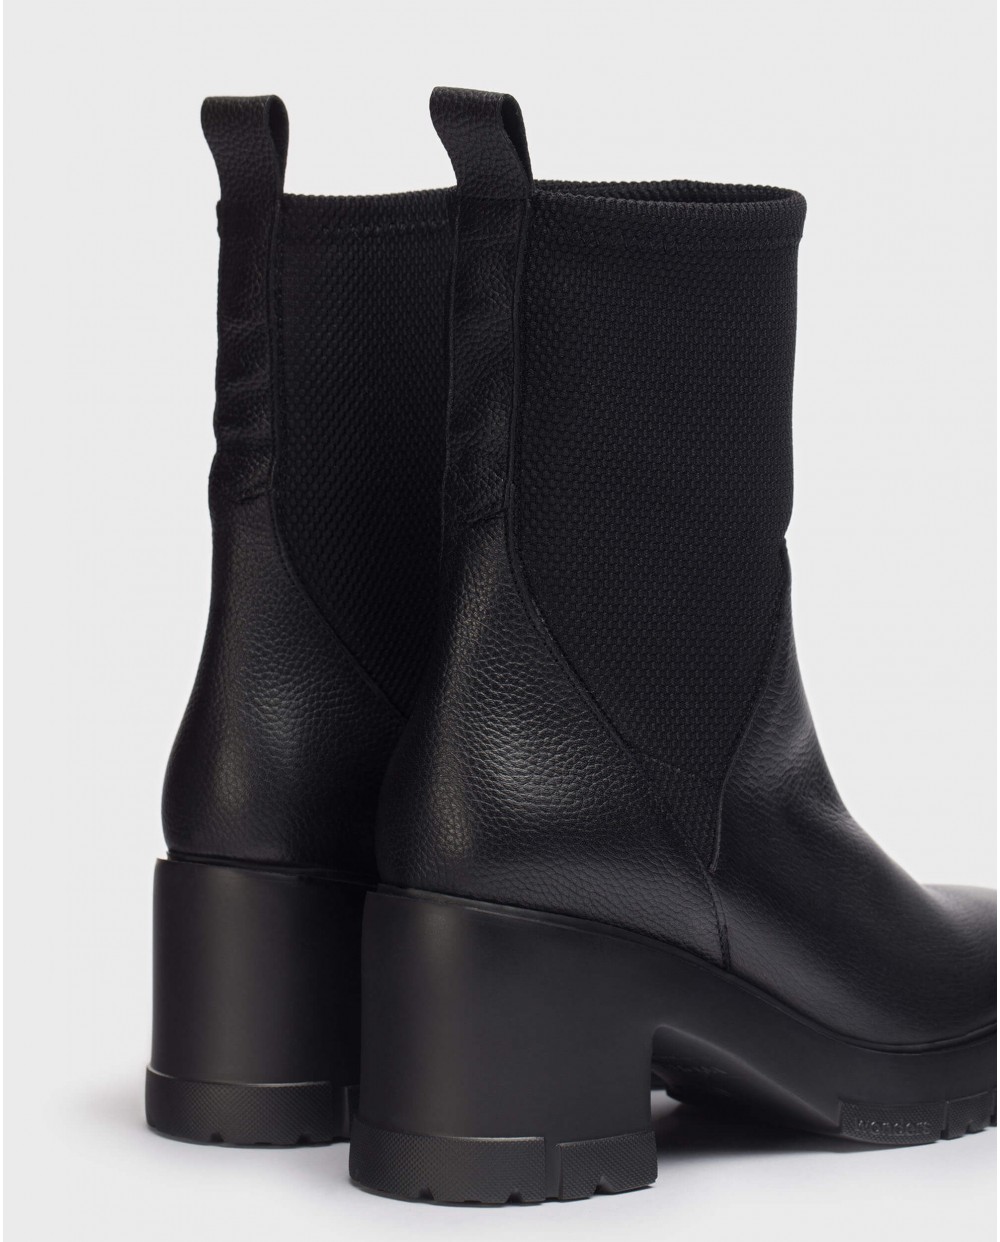 Wonders-Ankle Boots-Briana sock Ankle Boot